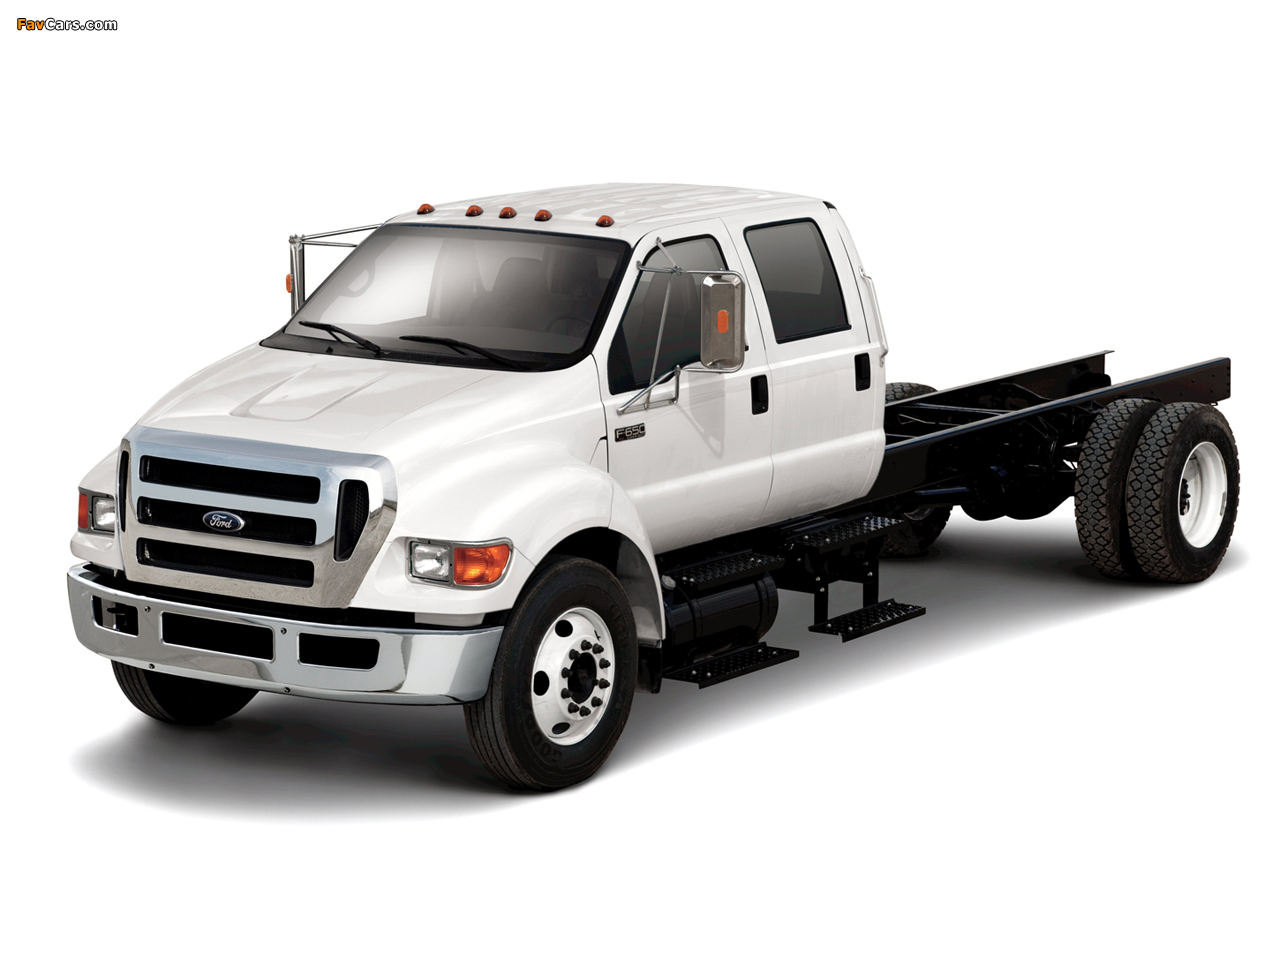 Images of Ford F-650 Super Duty Crew Cab 2007 (1280 x 960)